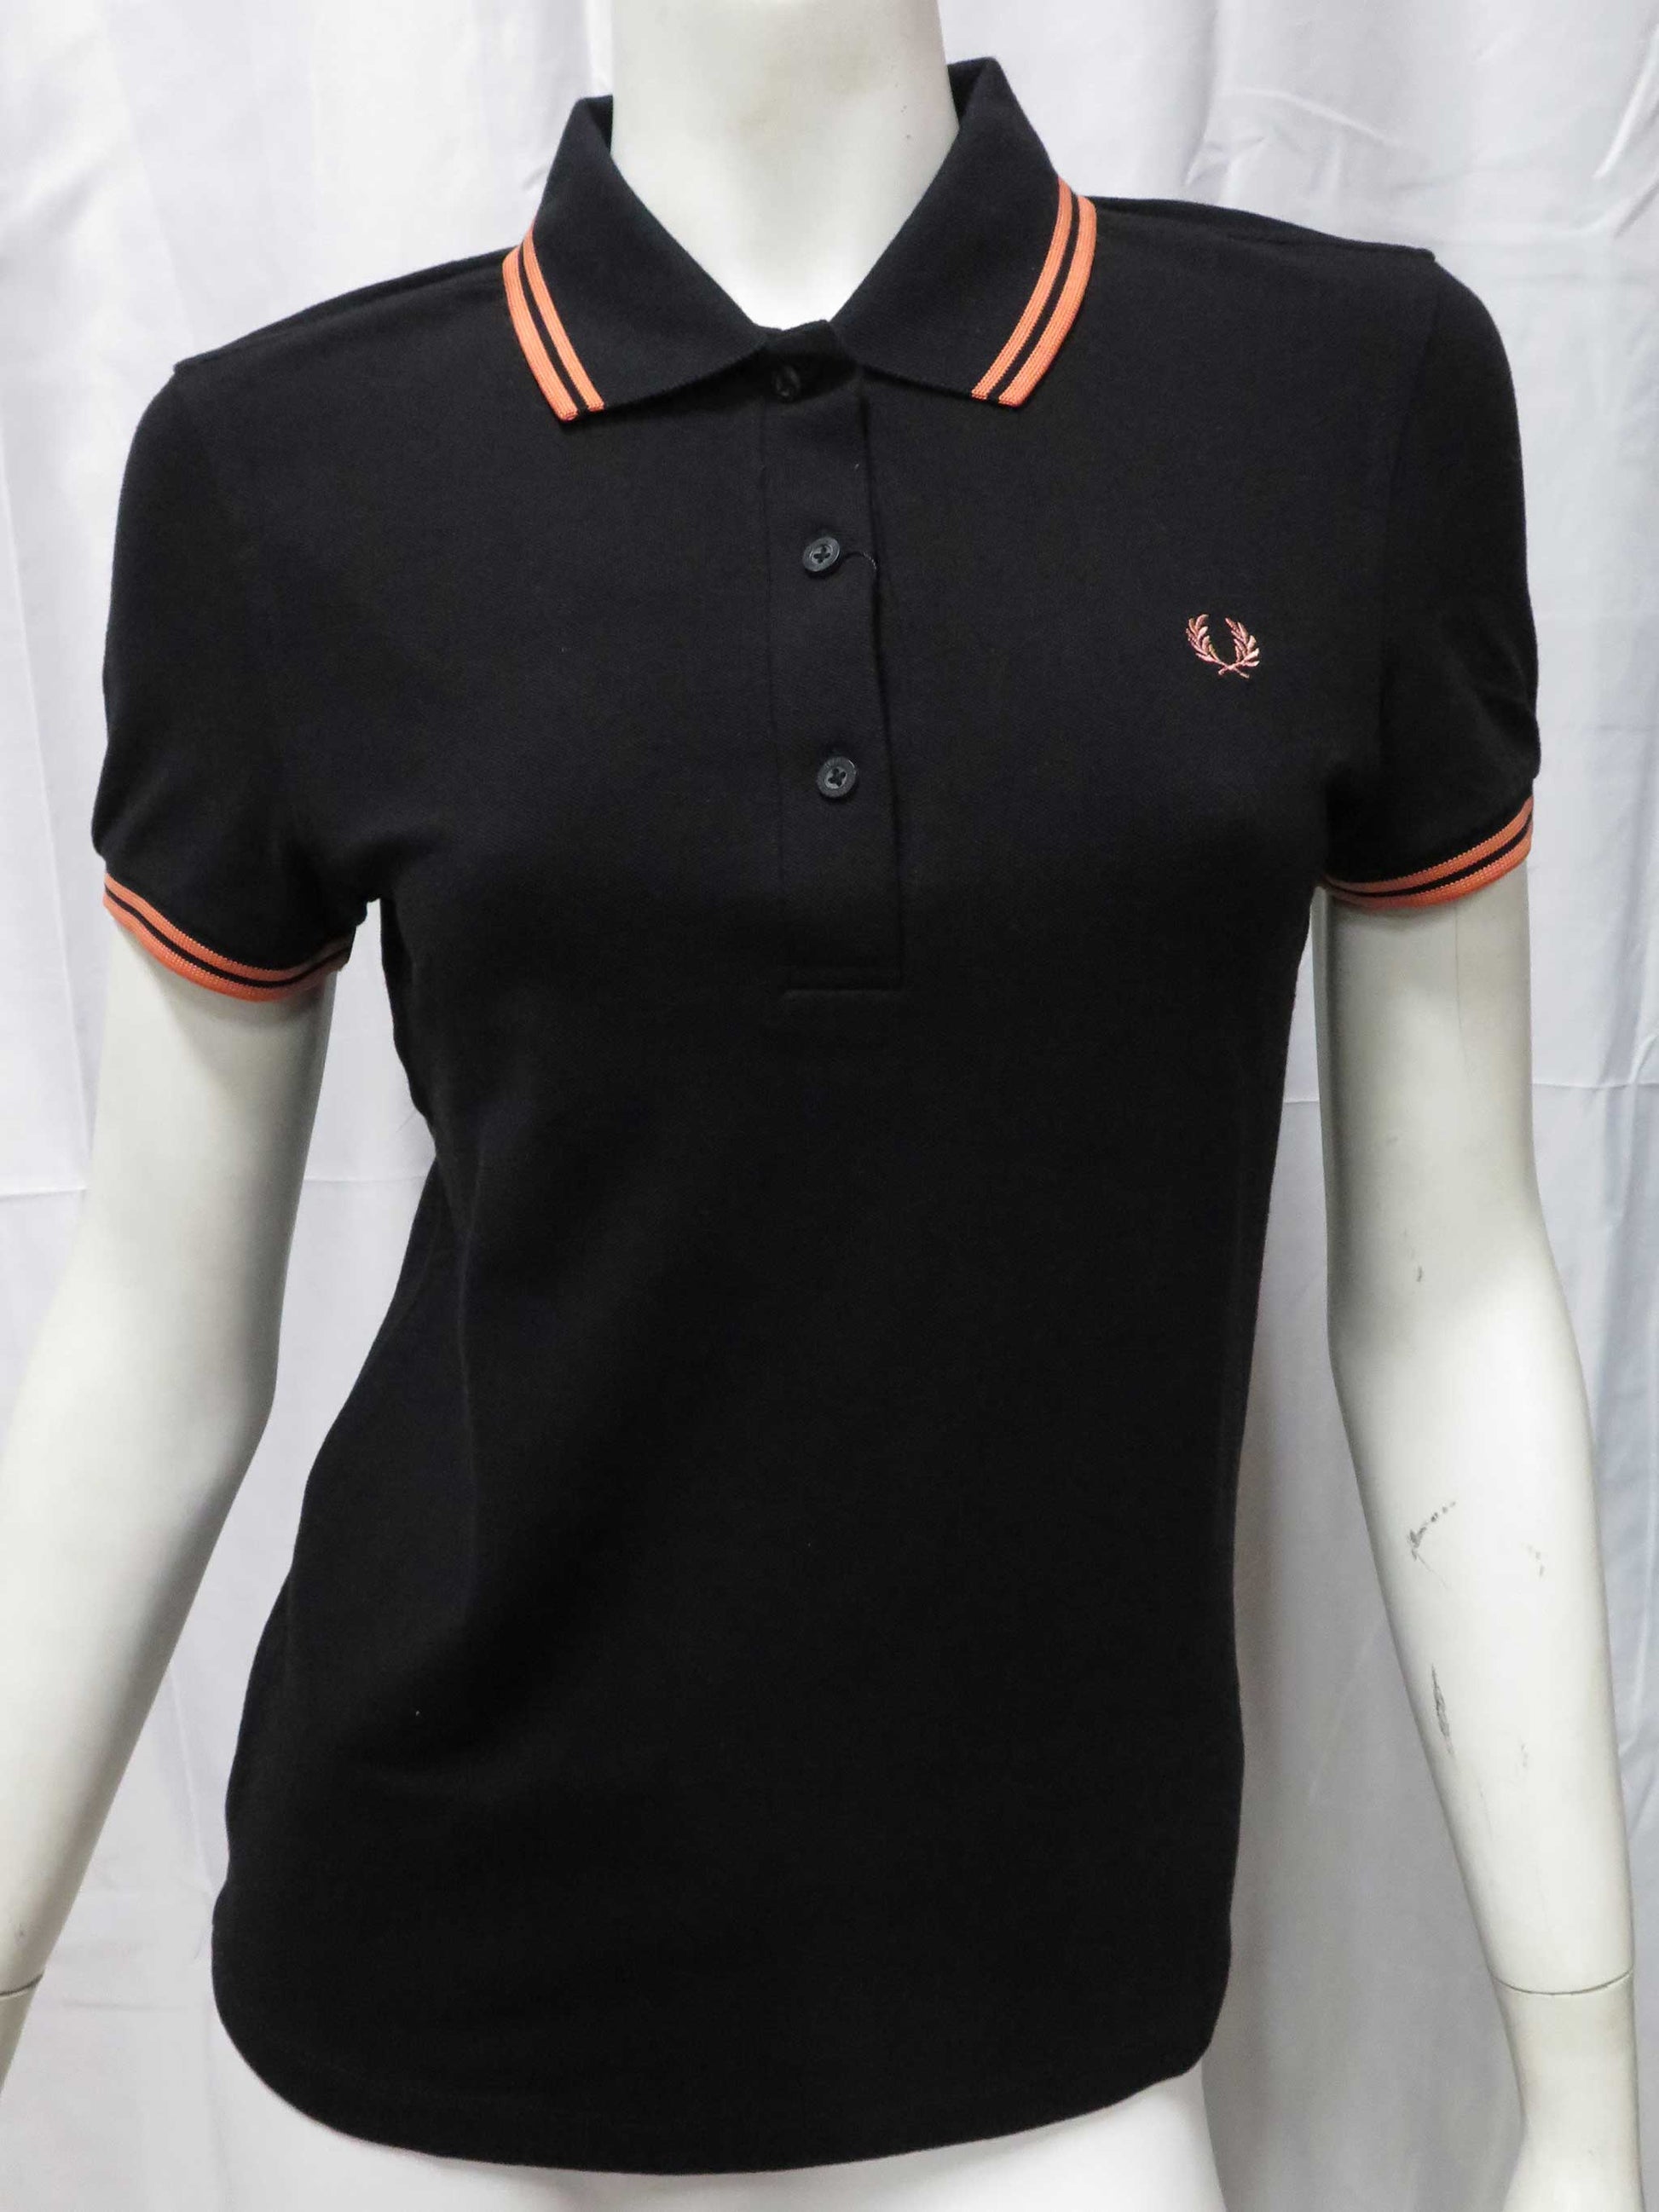 LADIES TWIN TIPPED FRED PERRY SHIRT (BLACK/PEACH)